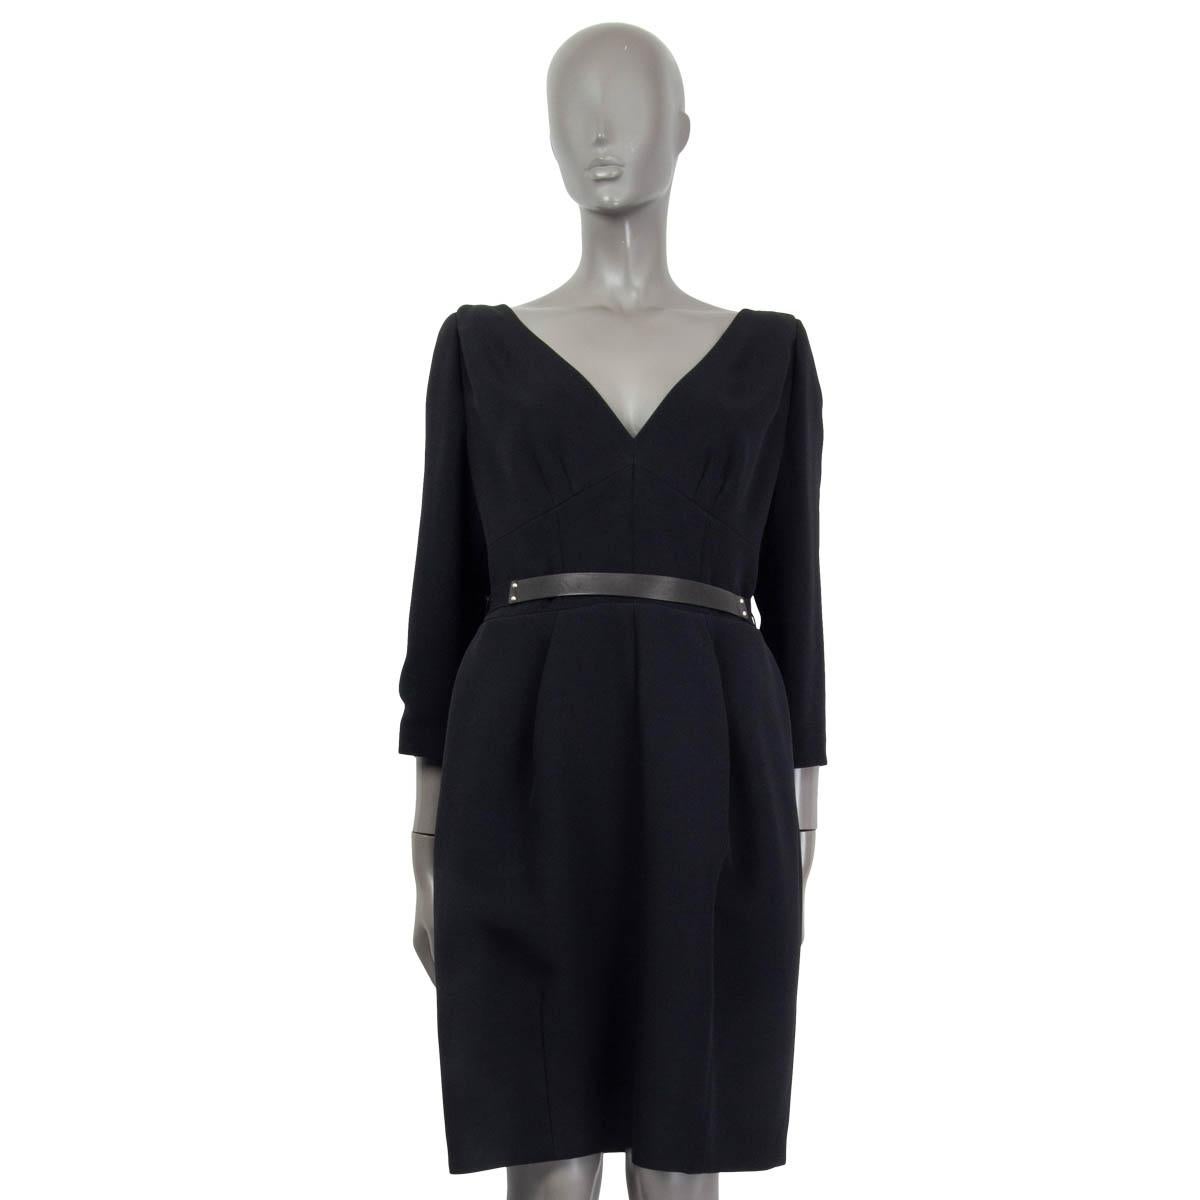 100% authentic Louis Vuitton leather belted dress in black acetate (58%) and viscose (42%). Features 3/4 sleeves, a V-shaped collar and two slit pockets in the front. Opens with silver zipper in the back. Lined in silk (100%). Has been worn and